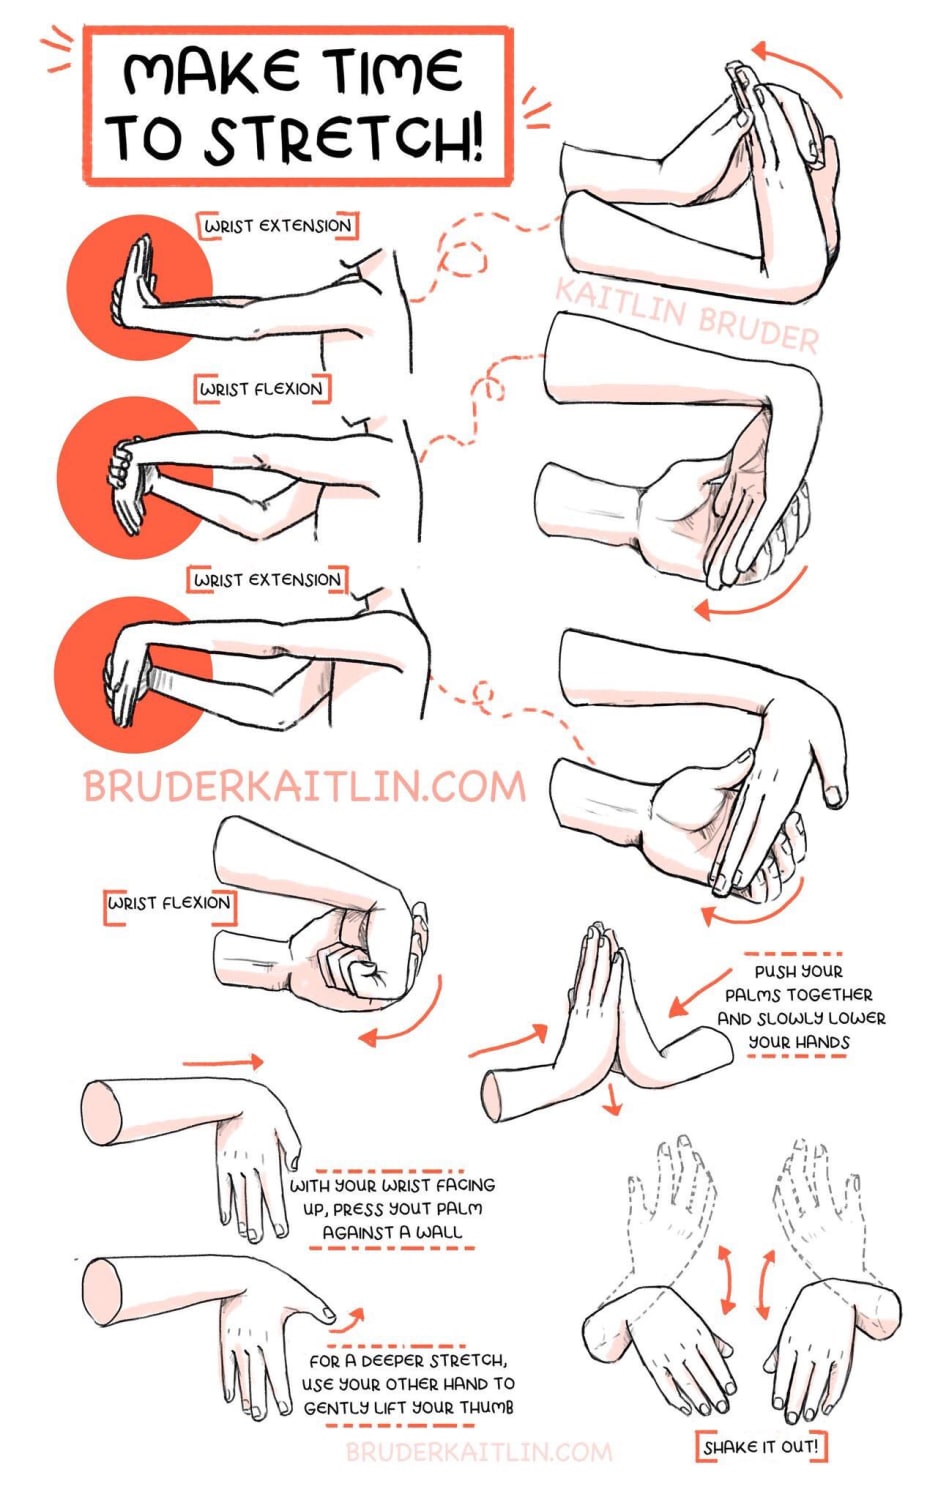 Cool wrist stretching guide.